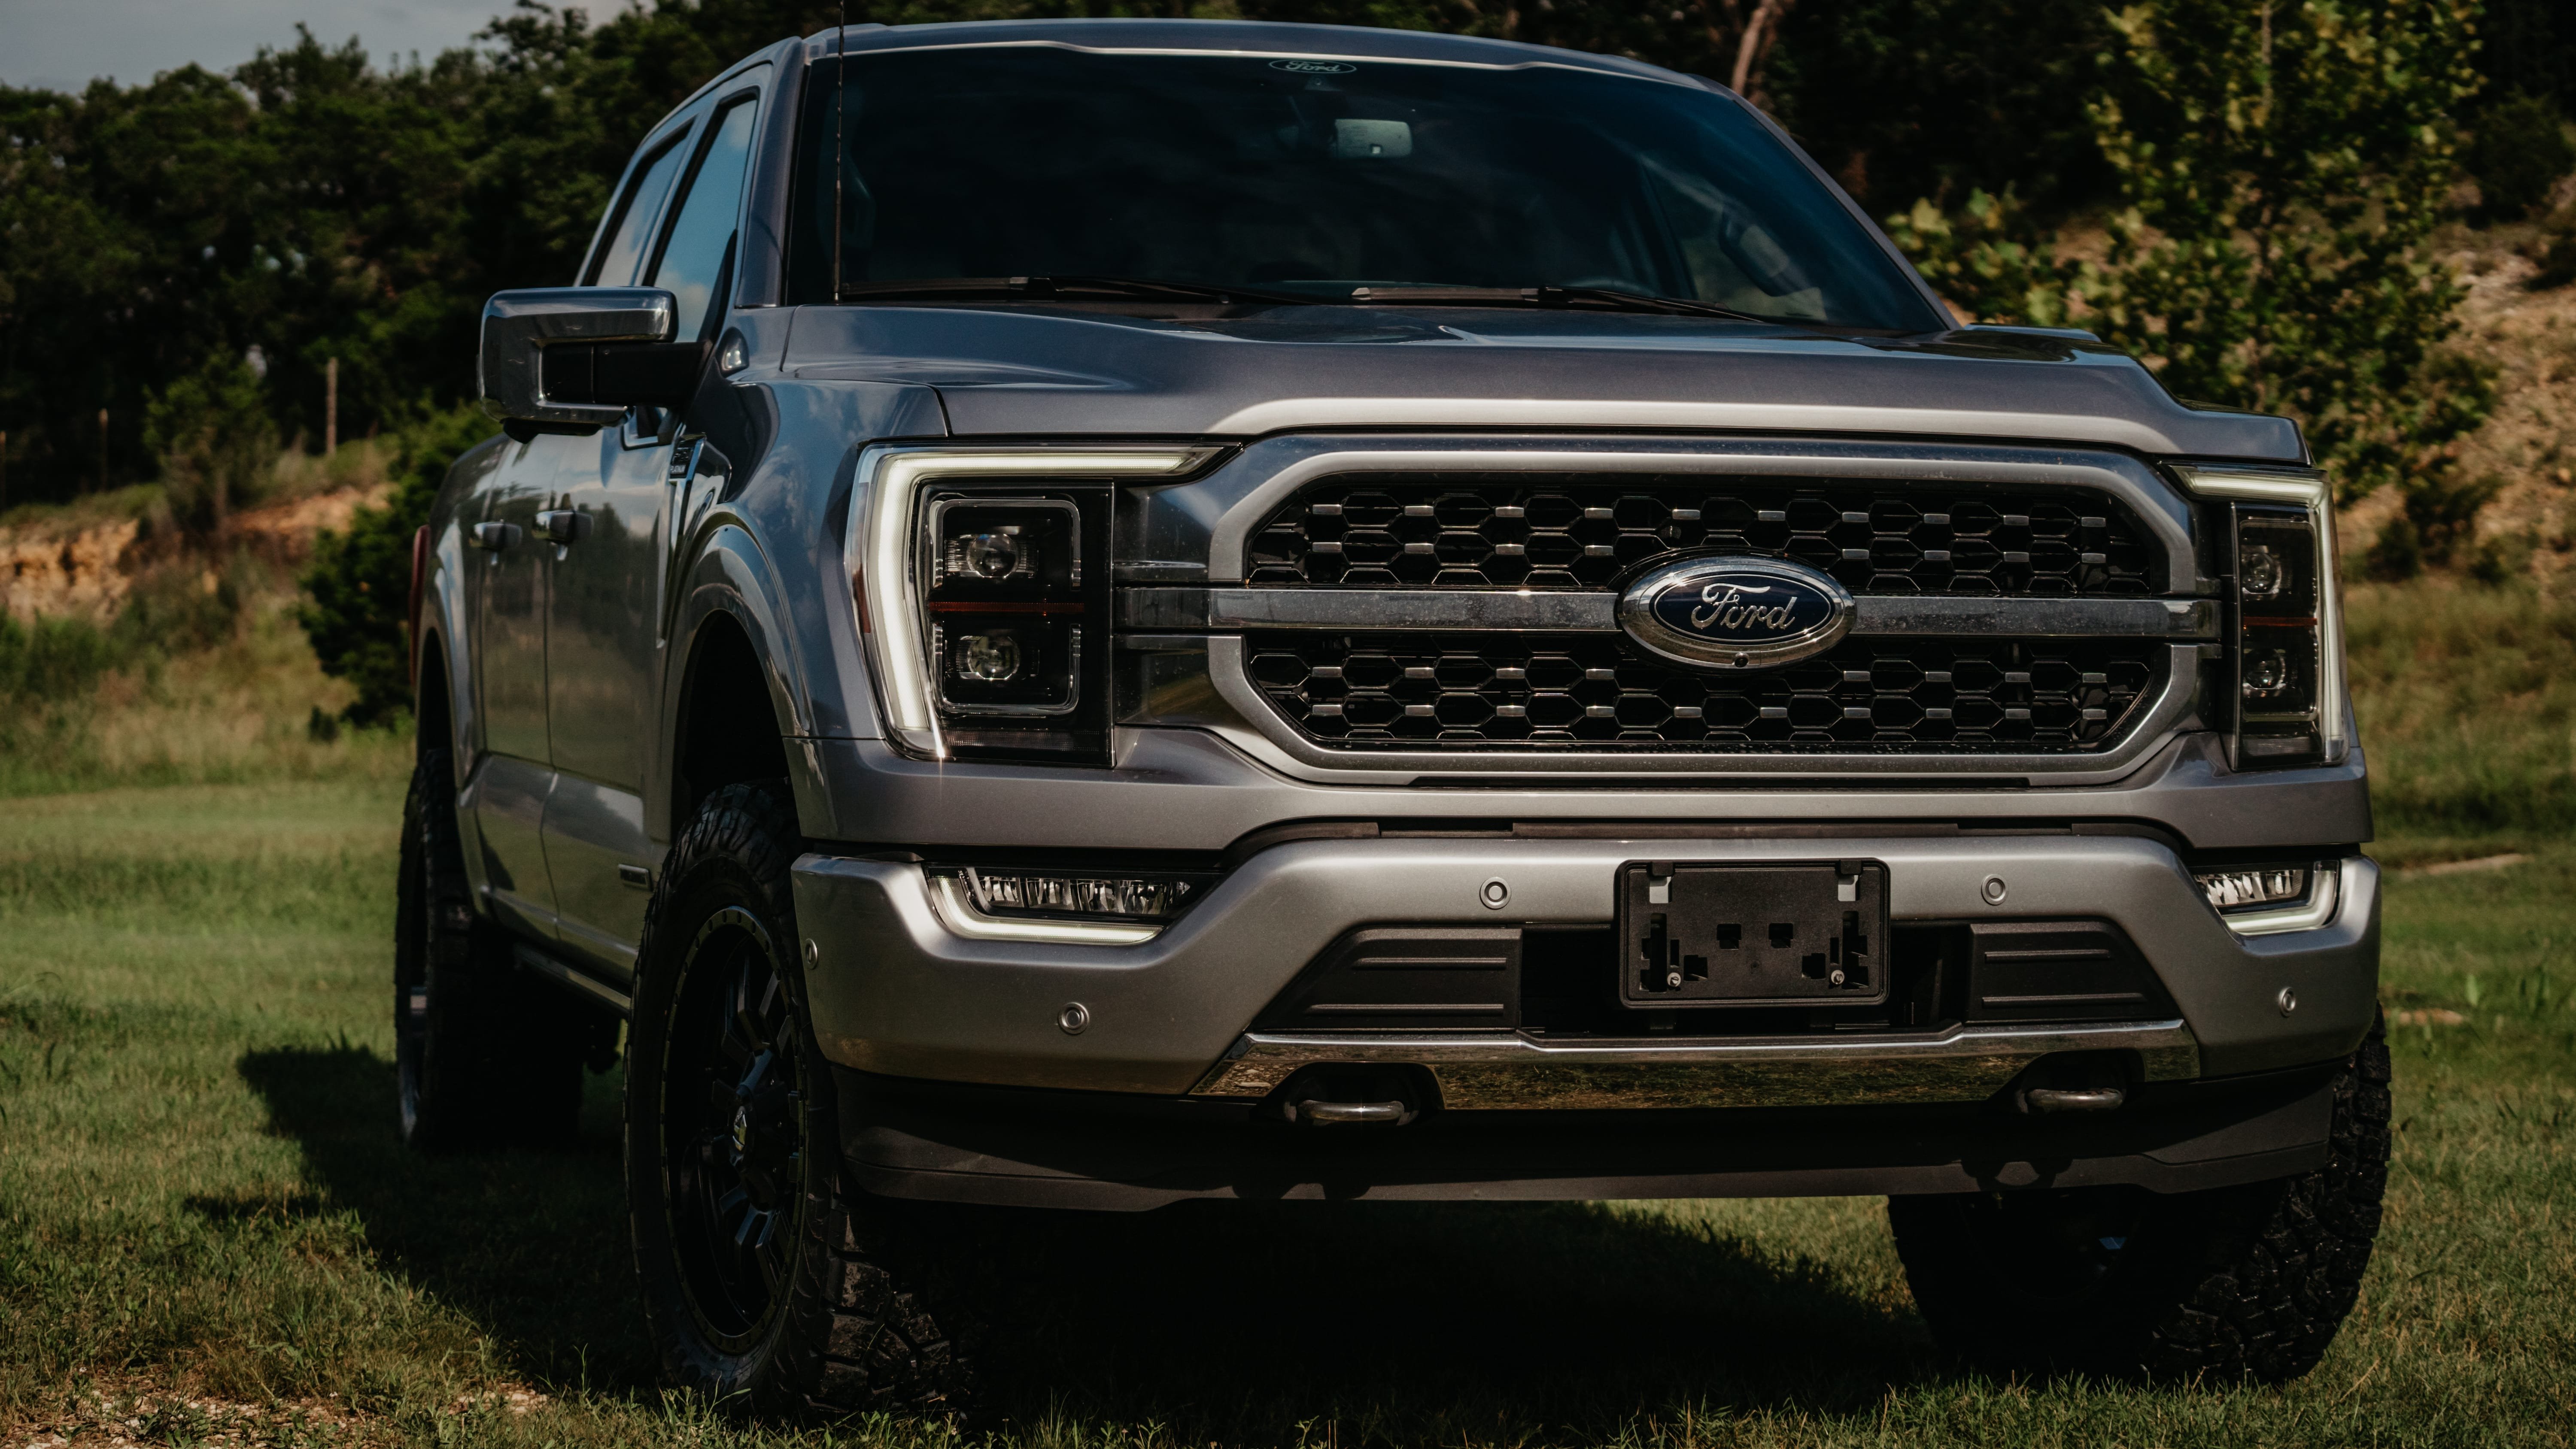 2021 Ford F-150 Platinum in Silver with Open Country ATIII 295/60R20 Tires, 20" Fuel Wheels